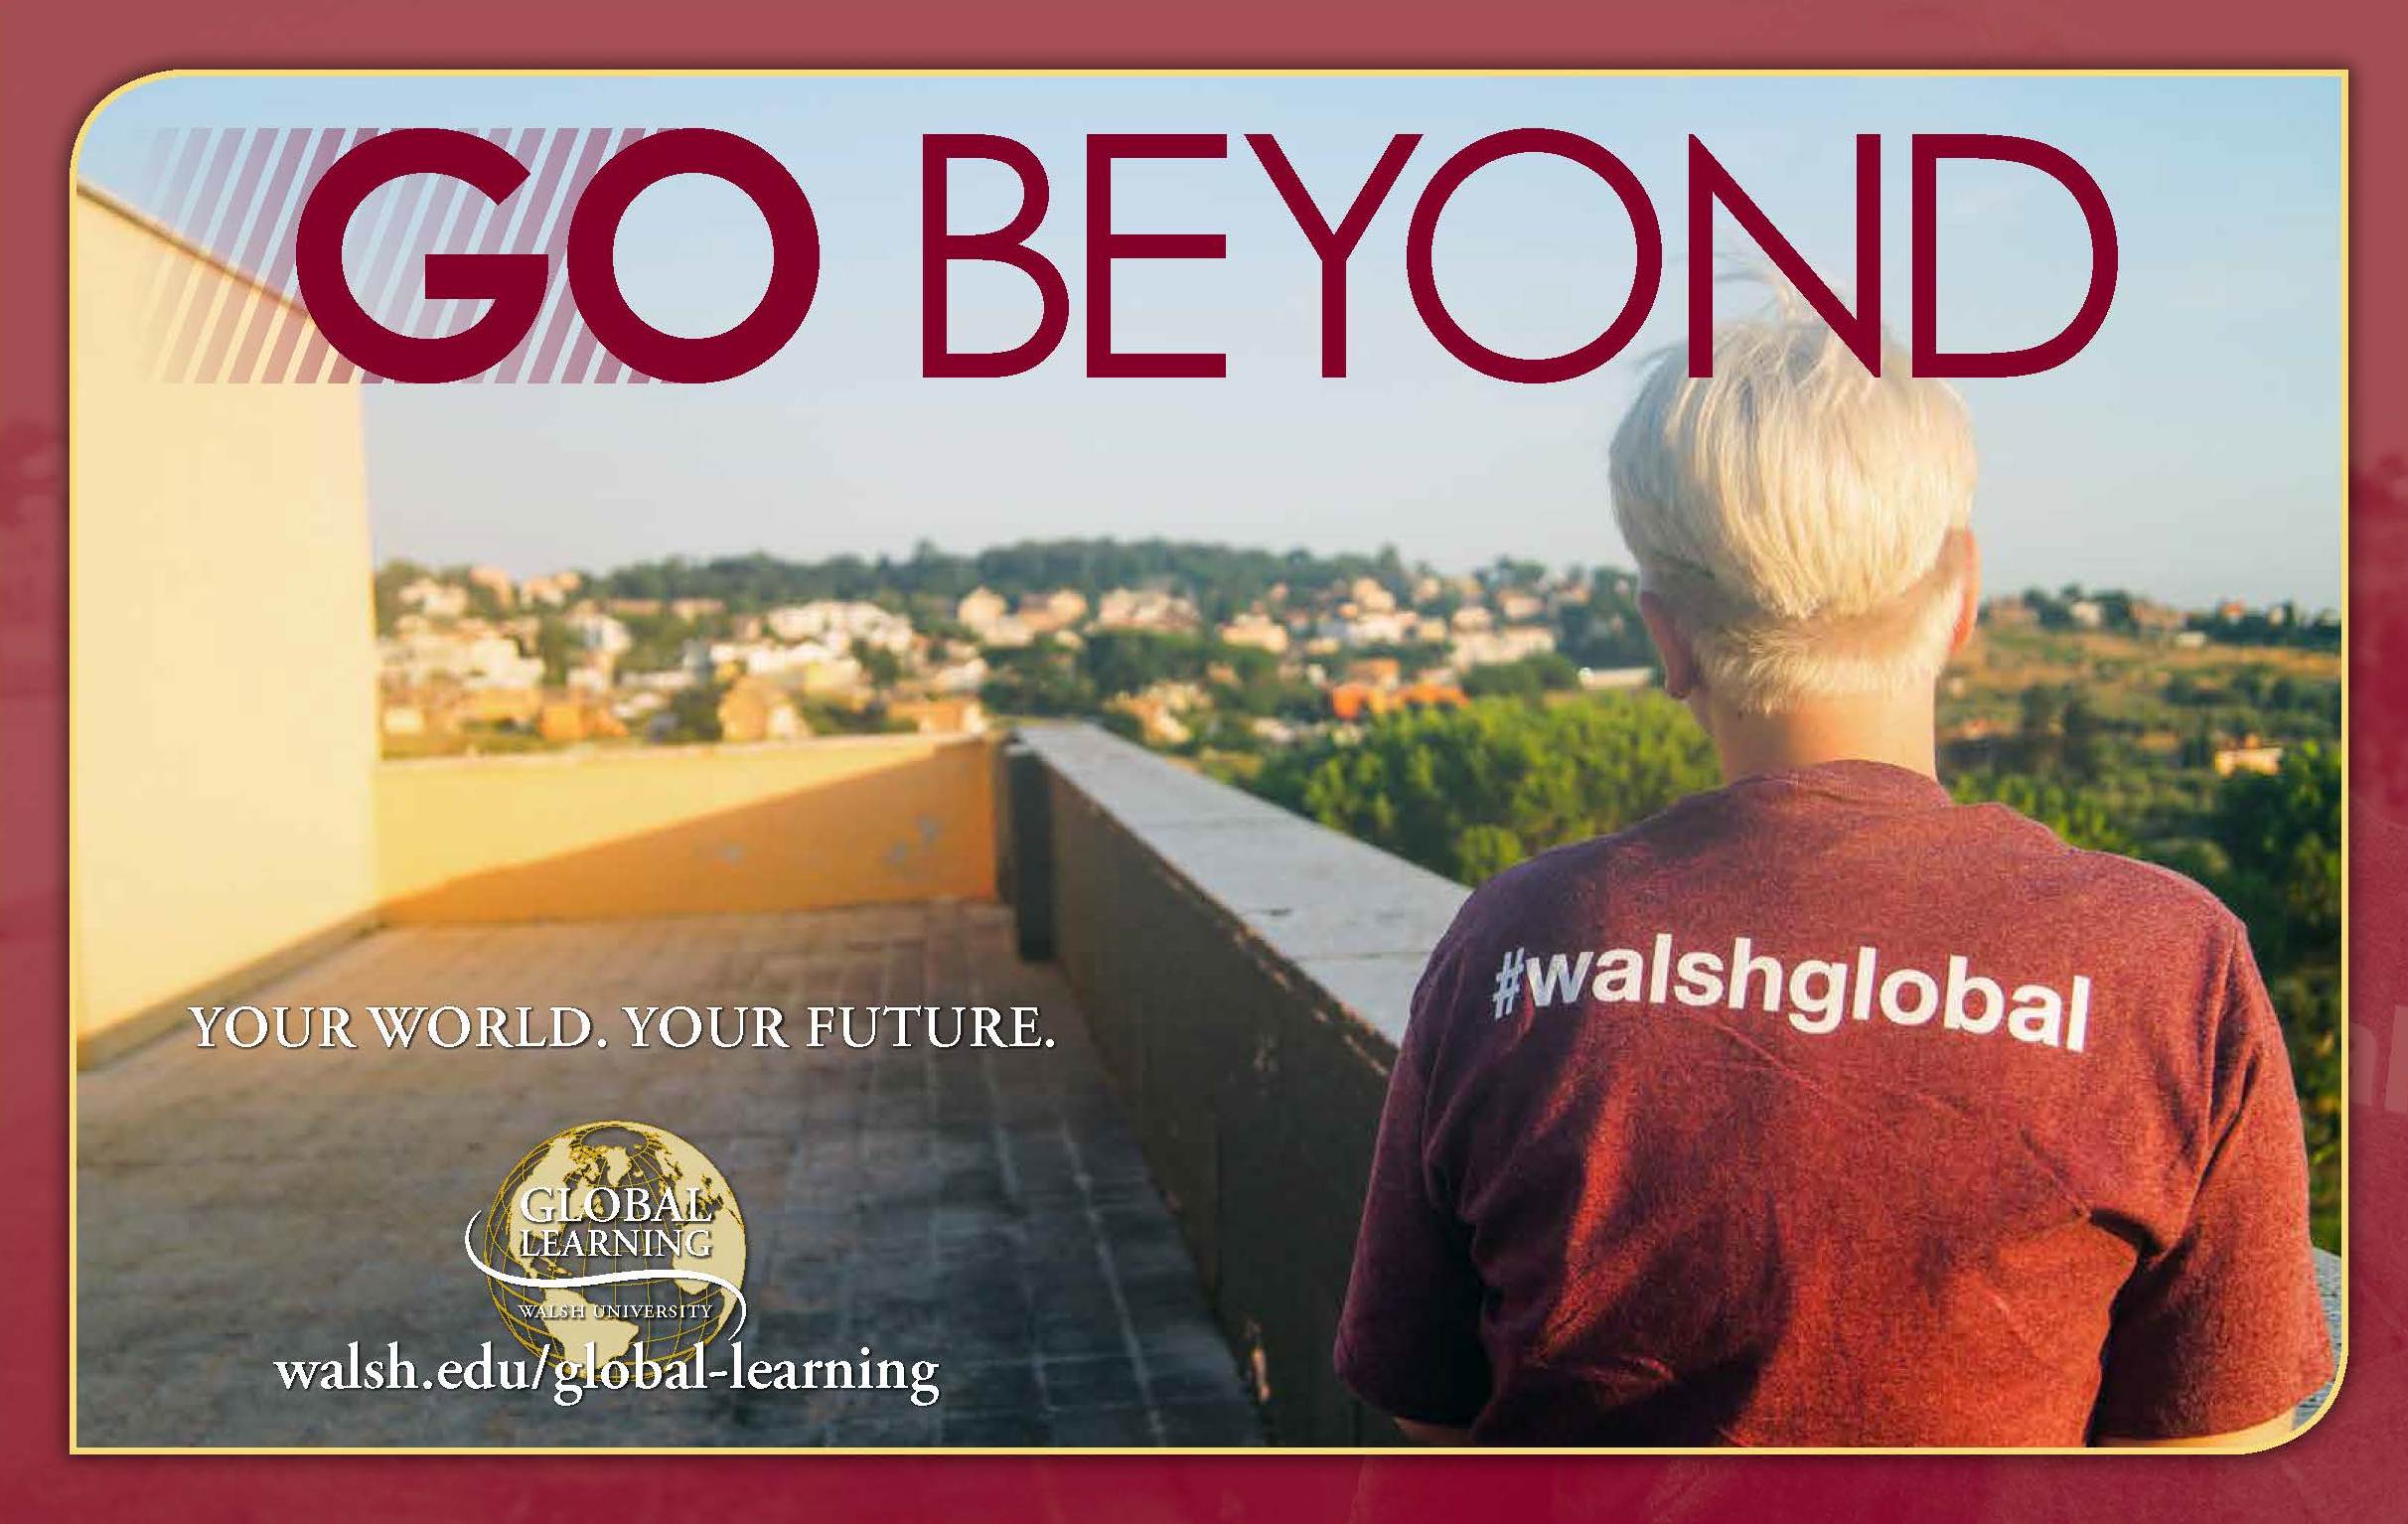 Global Learning Go Beyond image depicting a study abroad student looking out over the Italian landscape